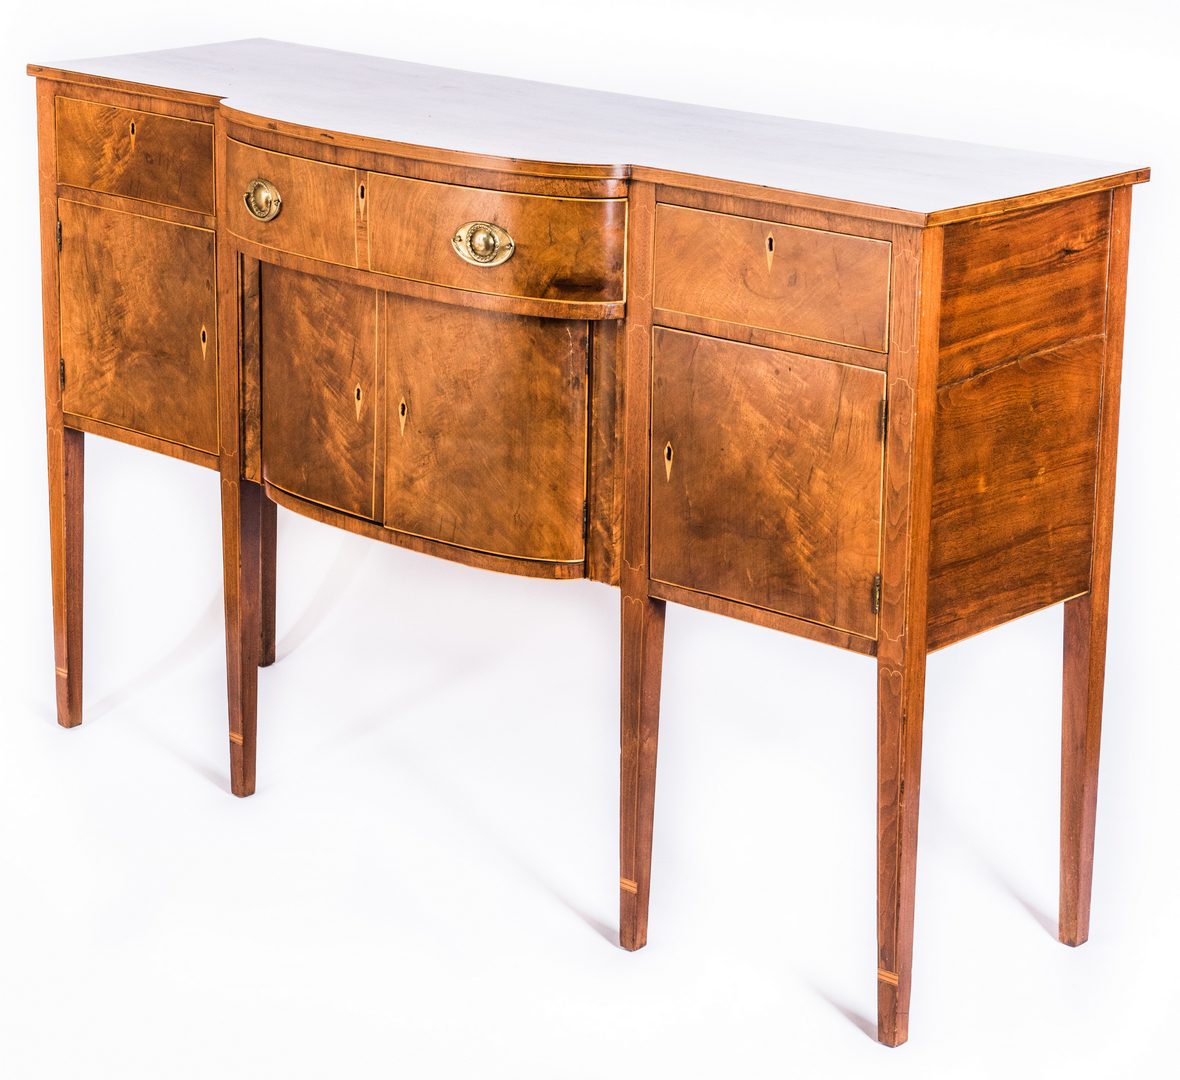 Lot 112: Virginia Federal Inlaid Sideboard, Signed by Maker